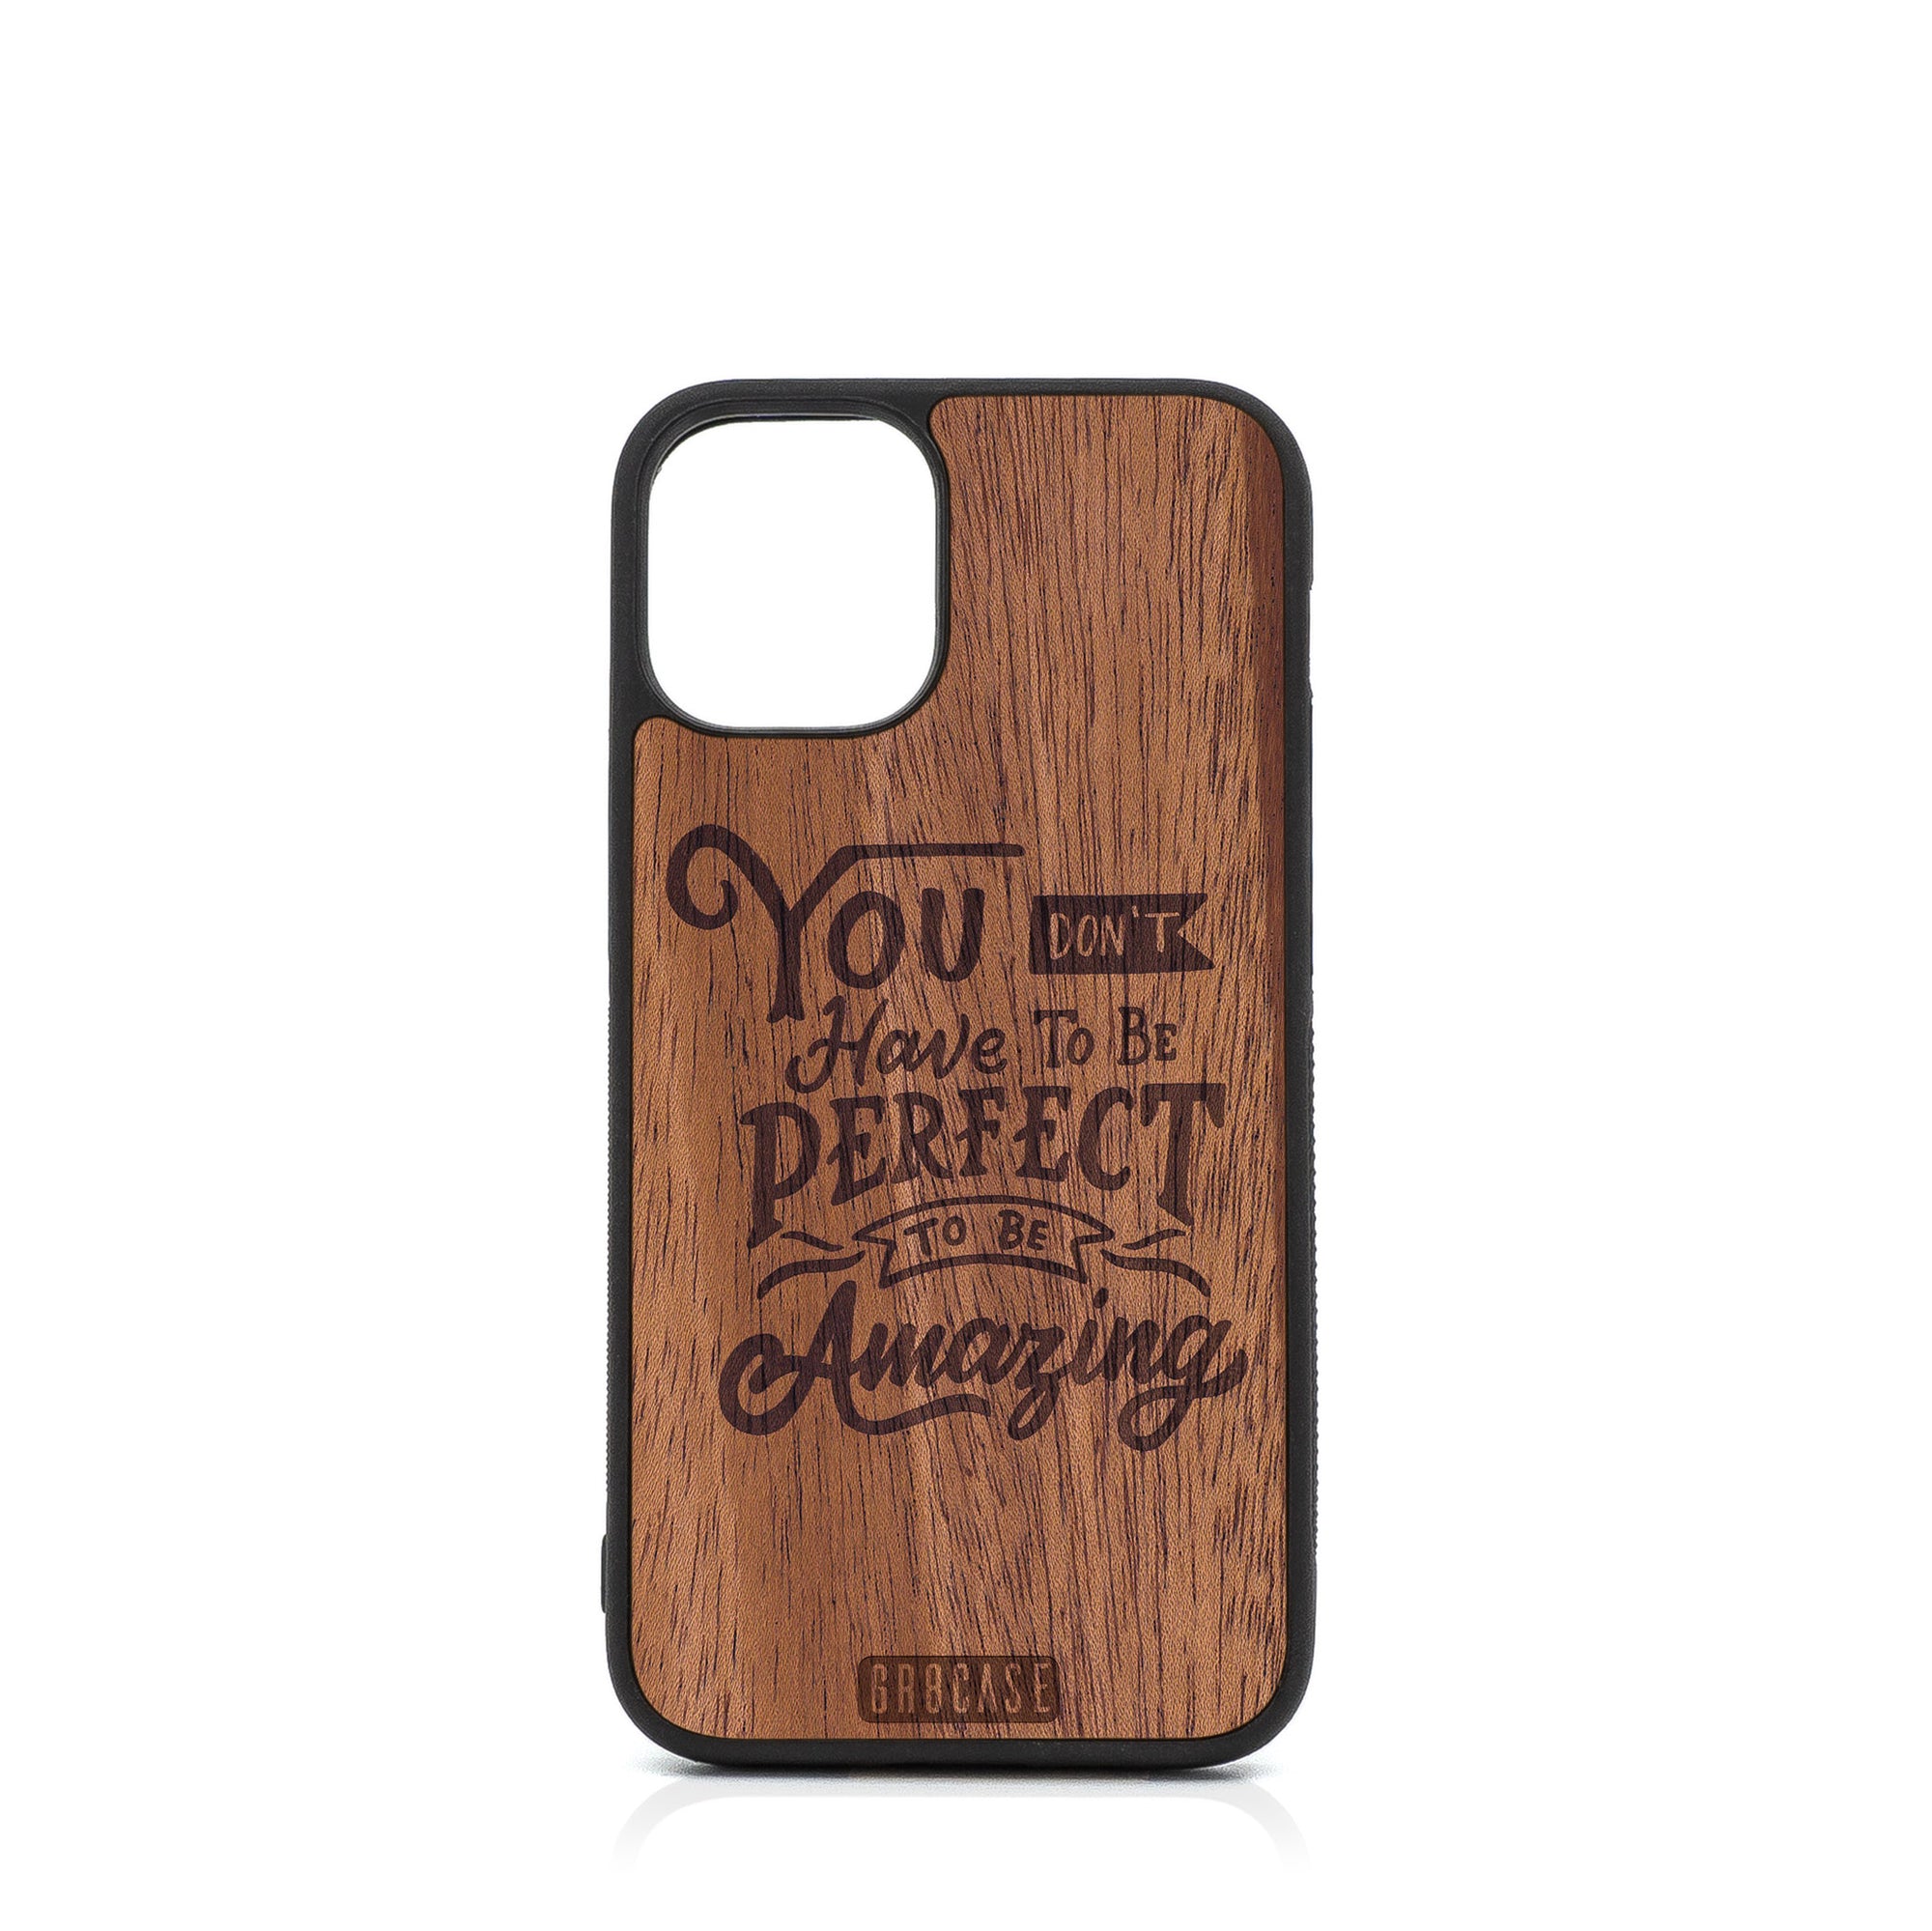 You Don’t Have To Be Perfect To Be Amazing Design Wood Case For iPhone 12 Mini